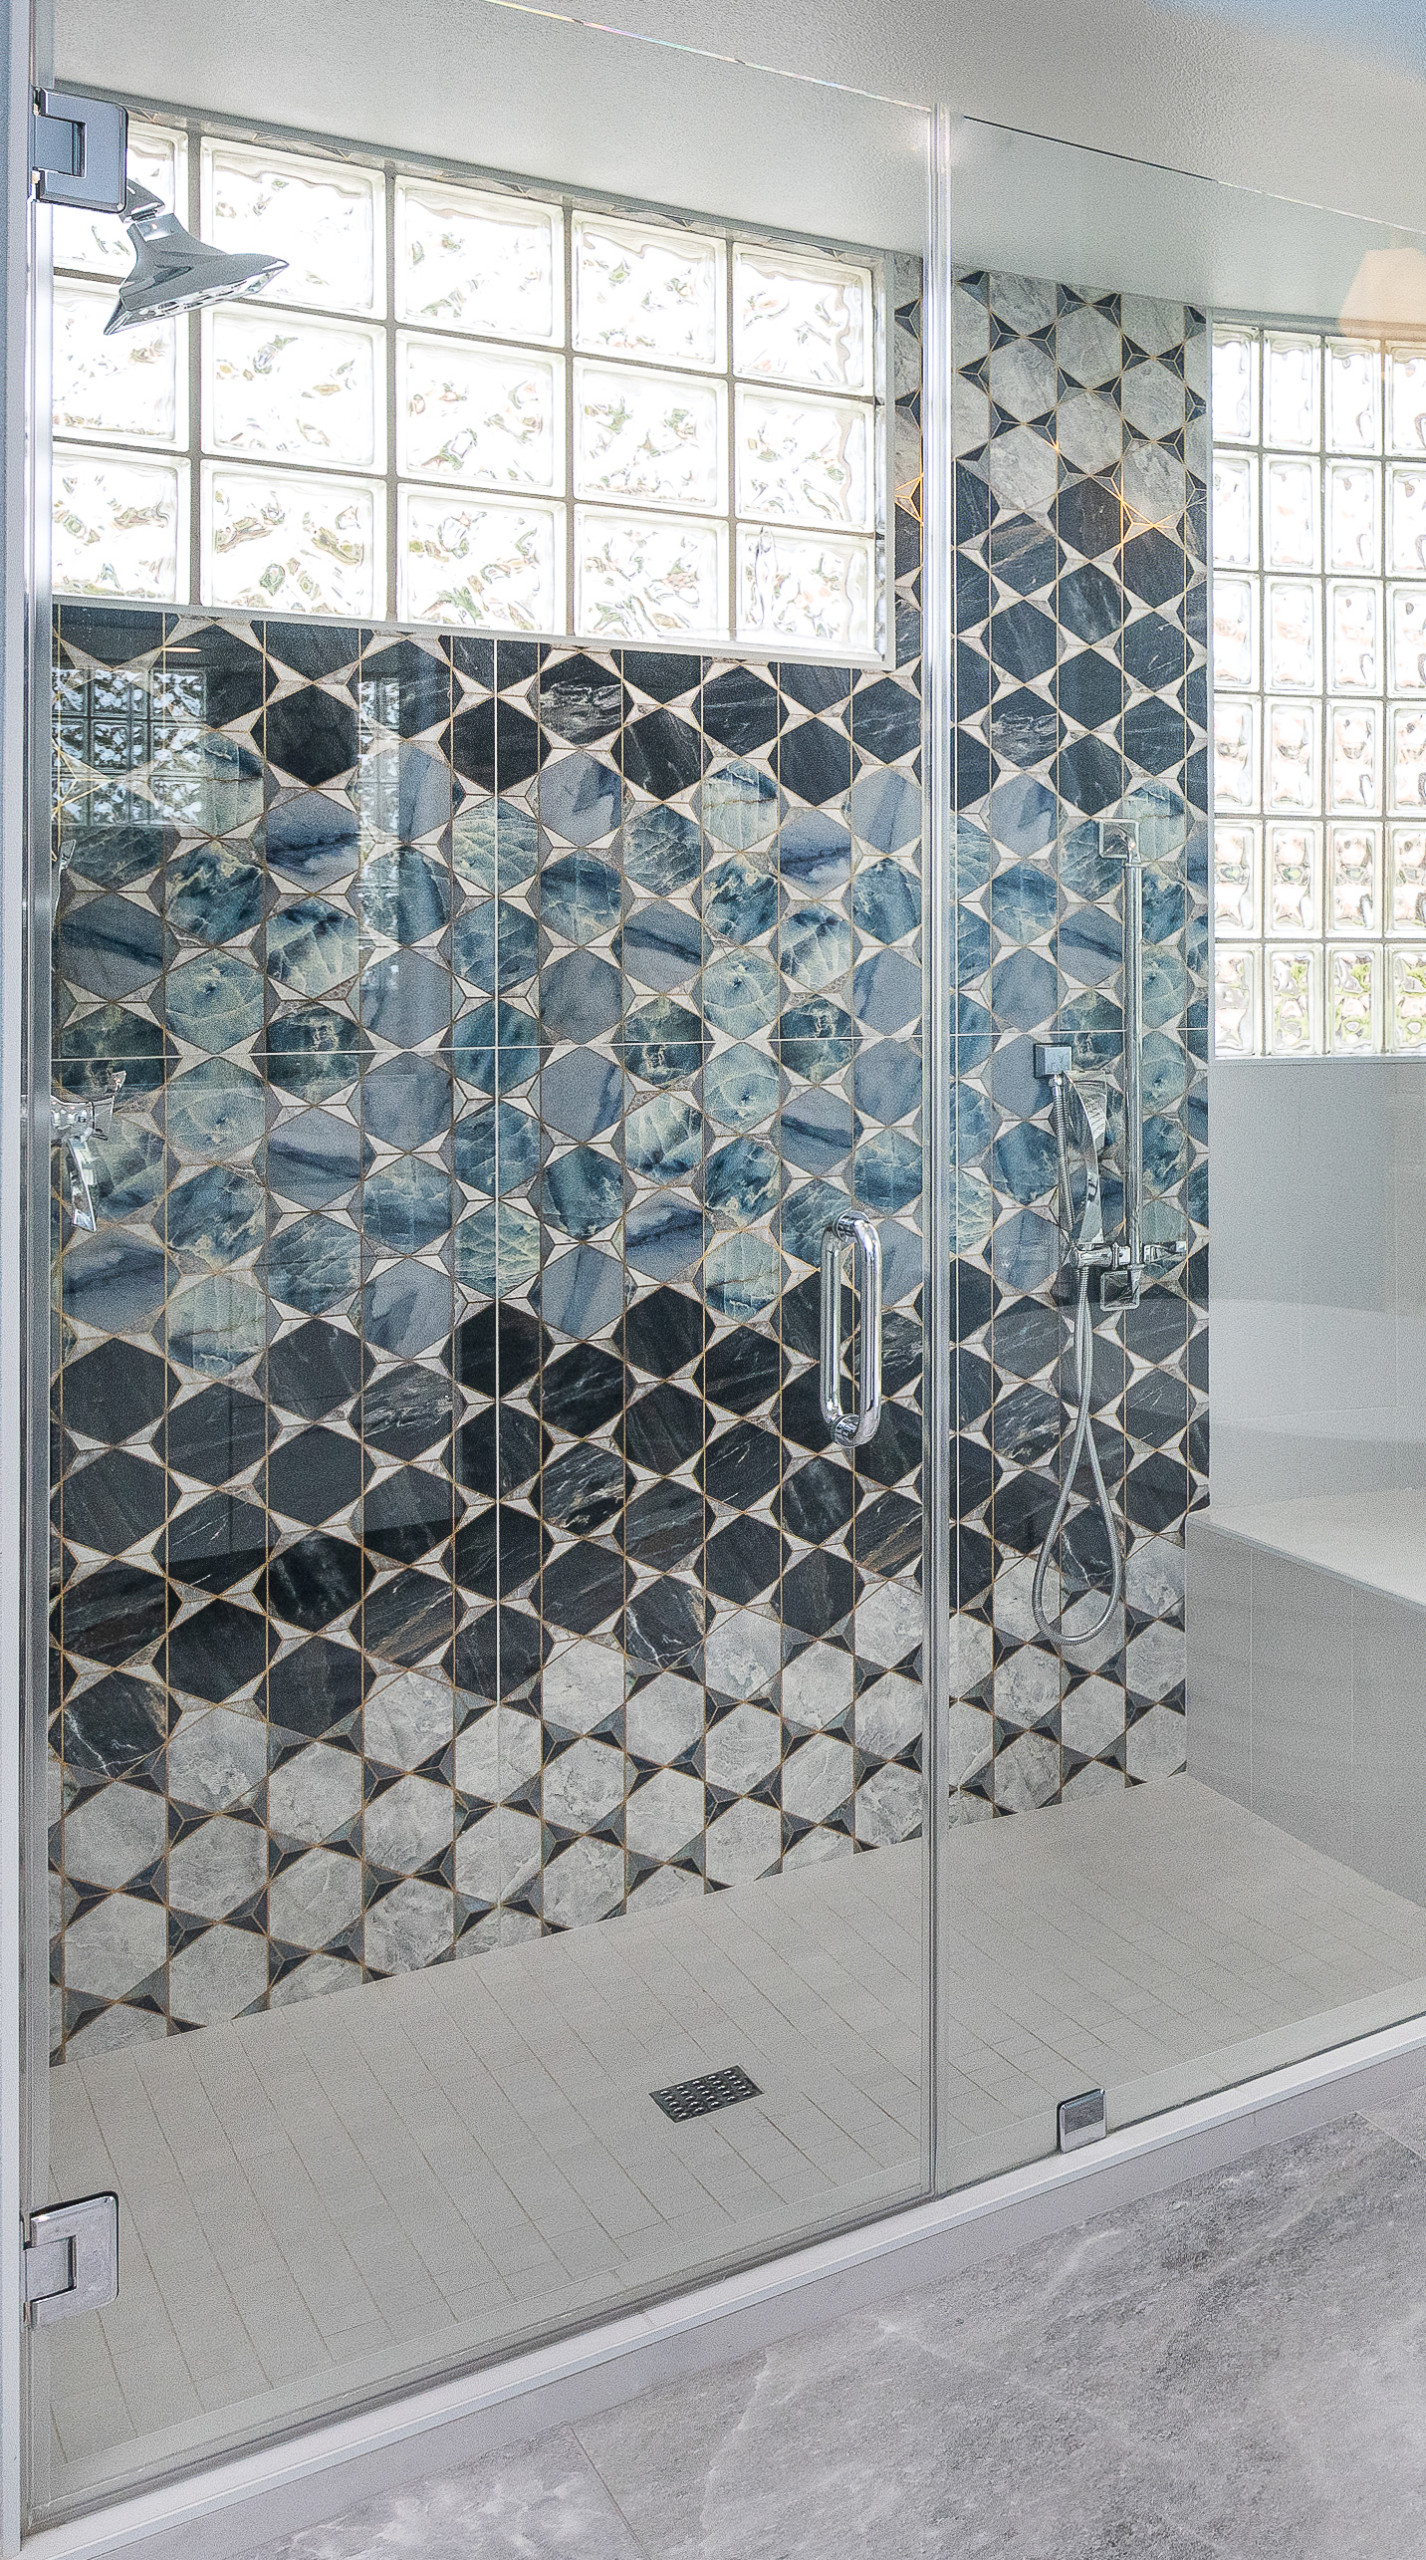 Primary bathroom hexagon tile with gold inlay detail